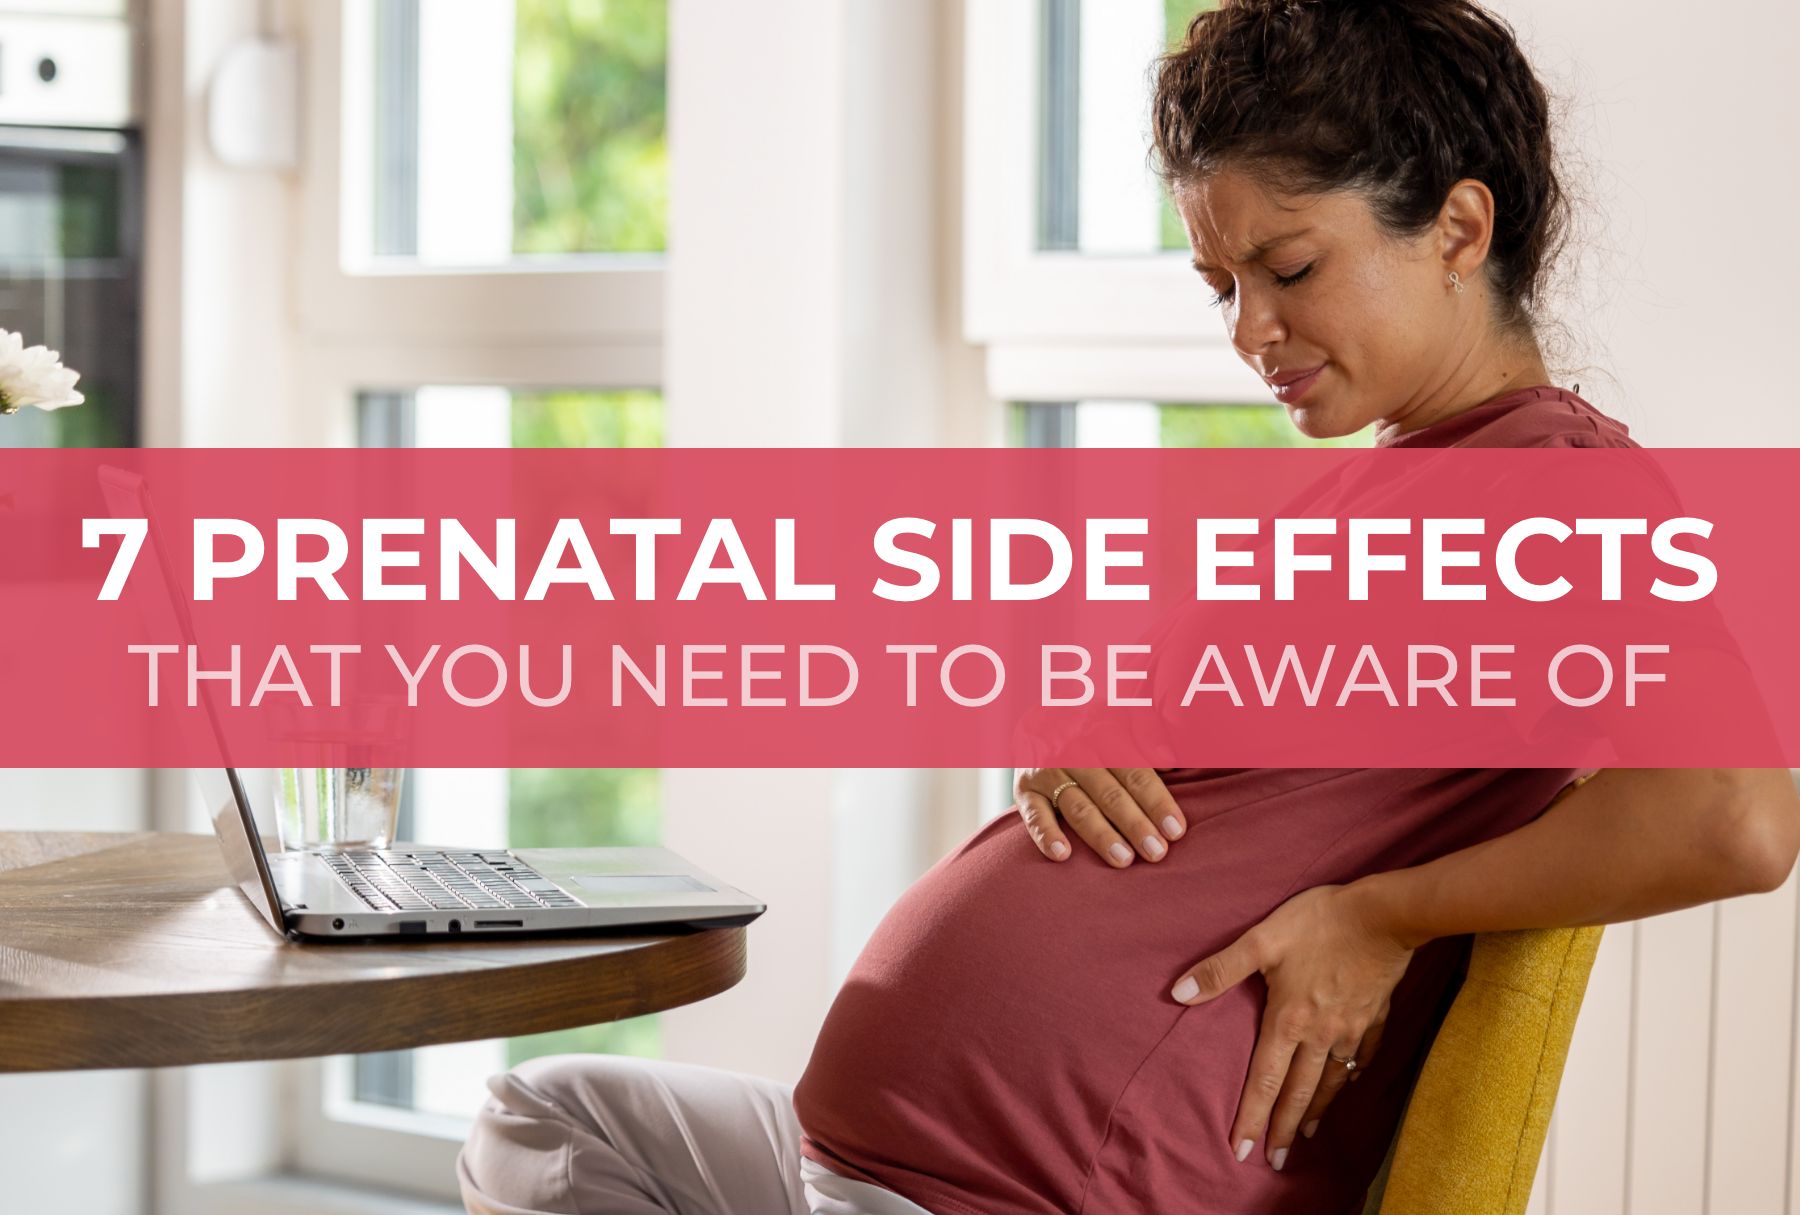 7 Prenatal Side Effects That You Need To Be Aware Of